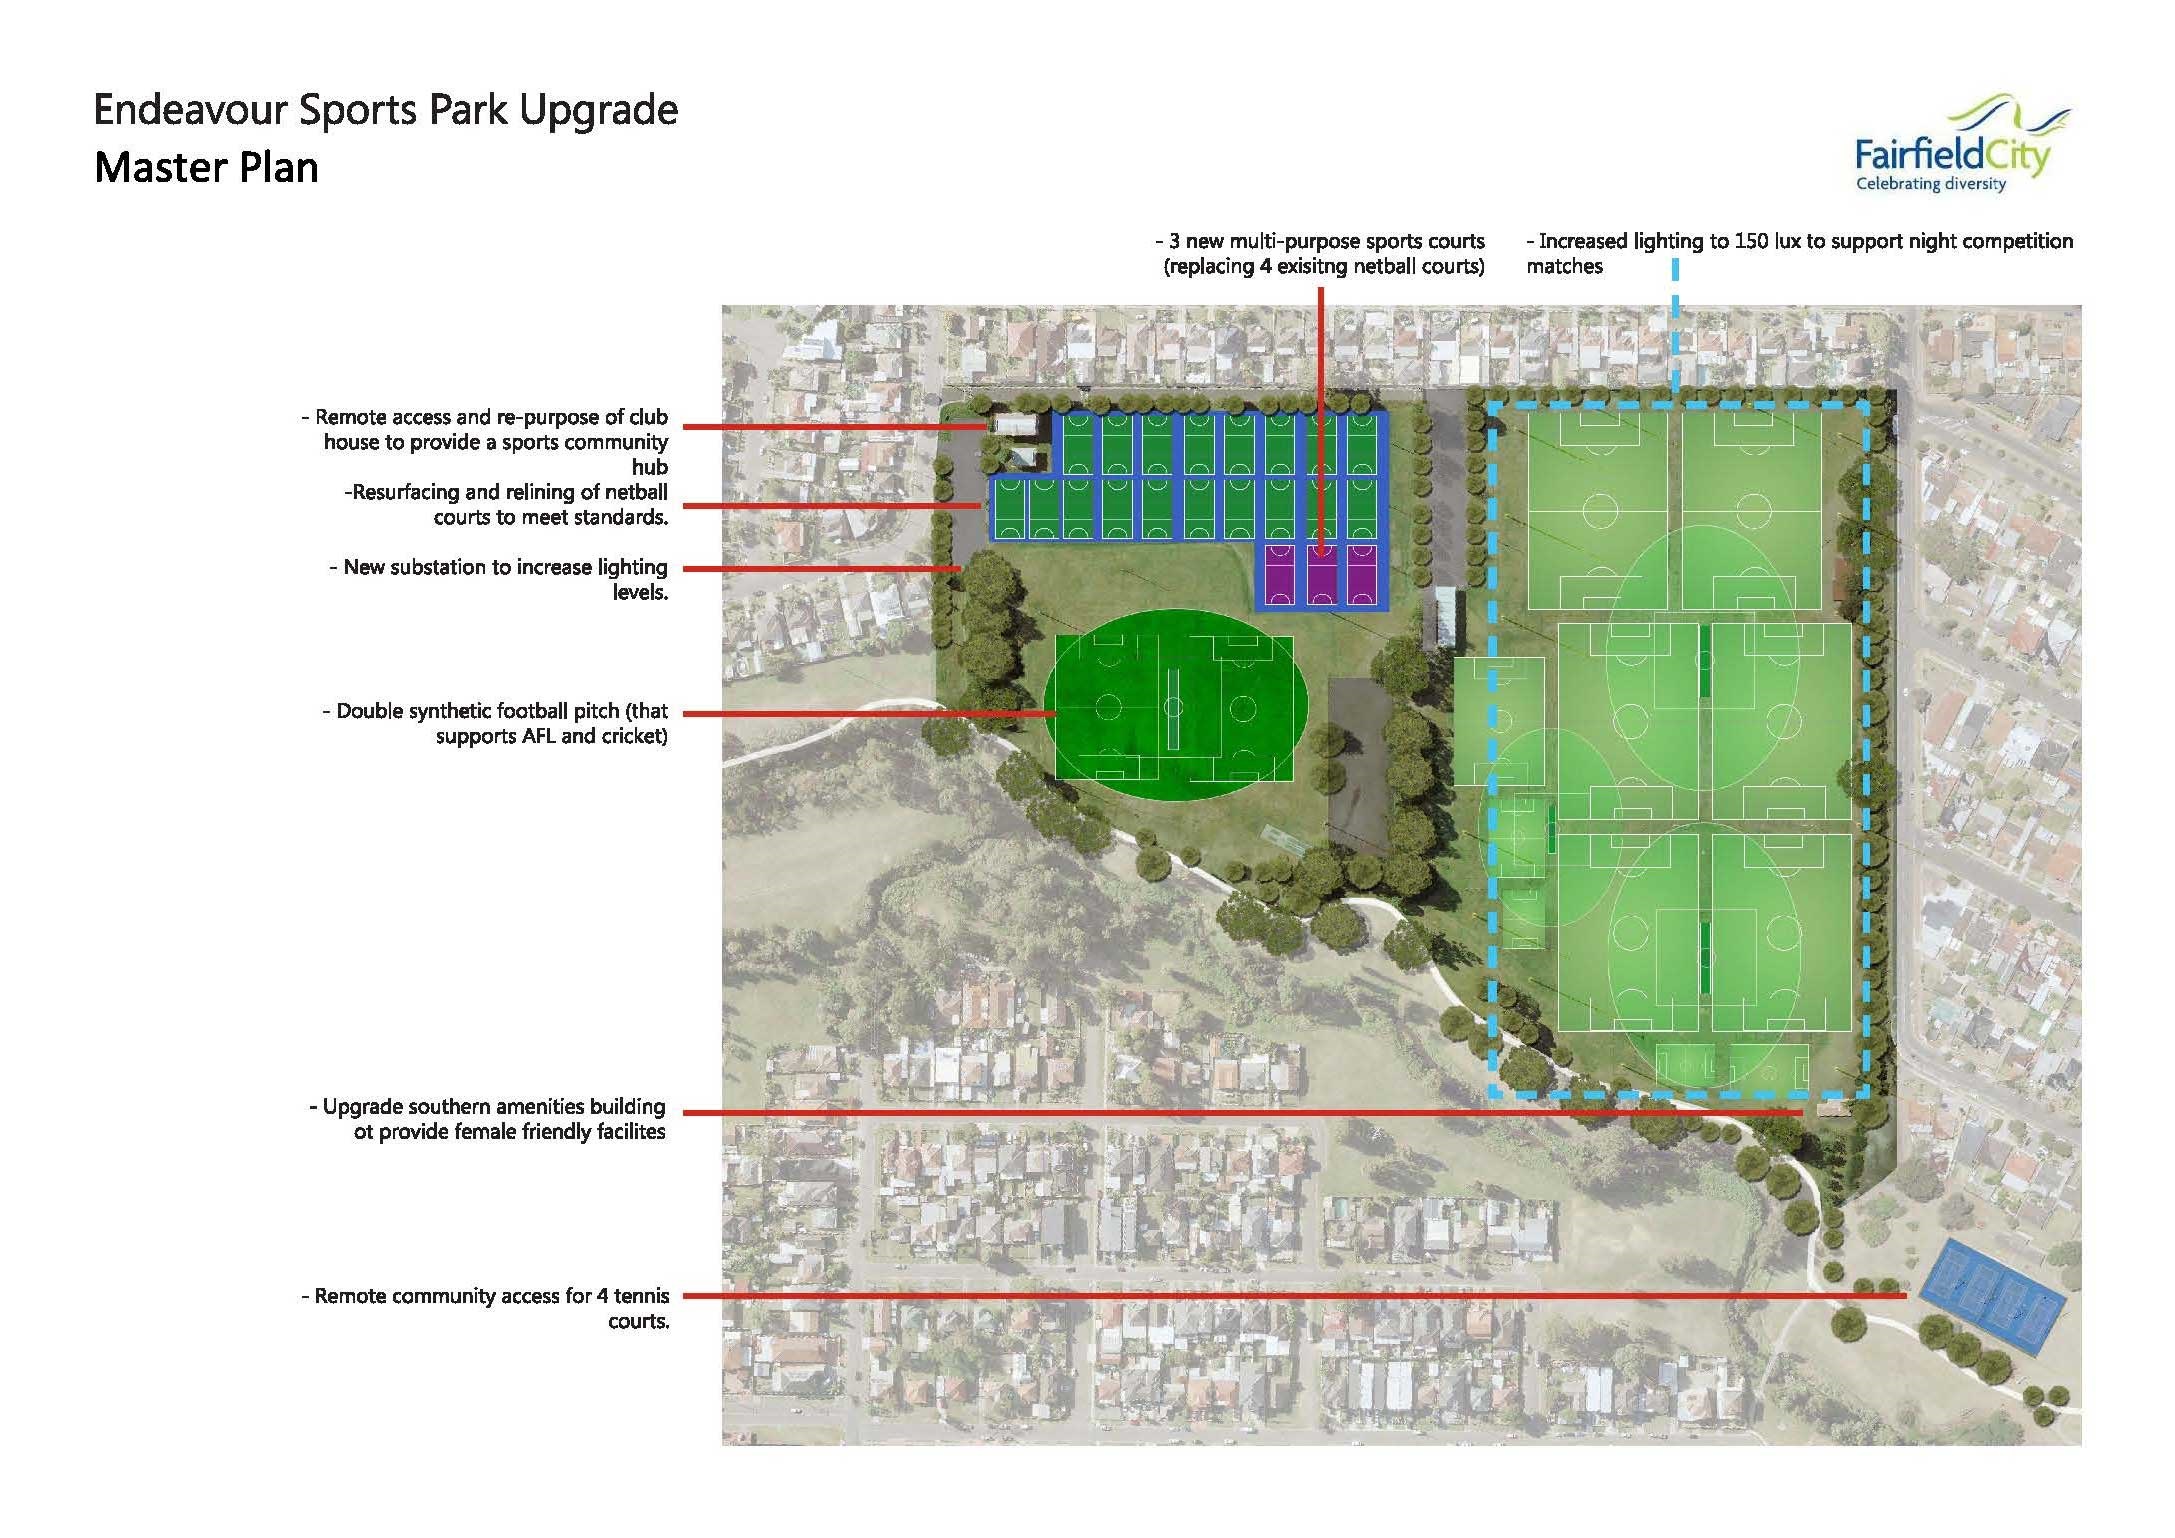 Map of Endeavour Sports Park Master Plan with upgrades proposed for the facilities